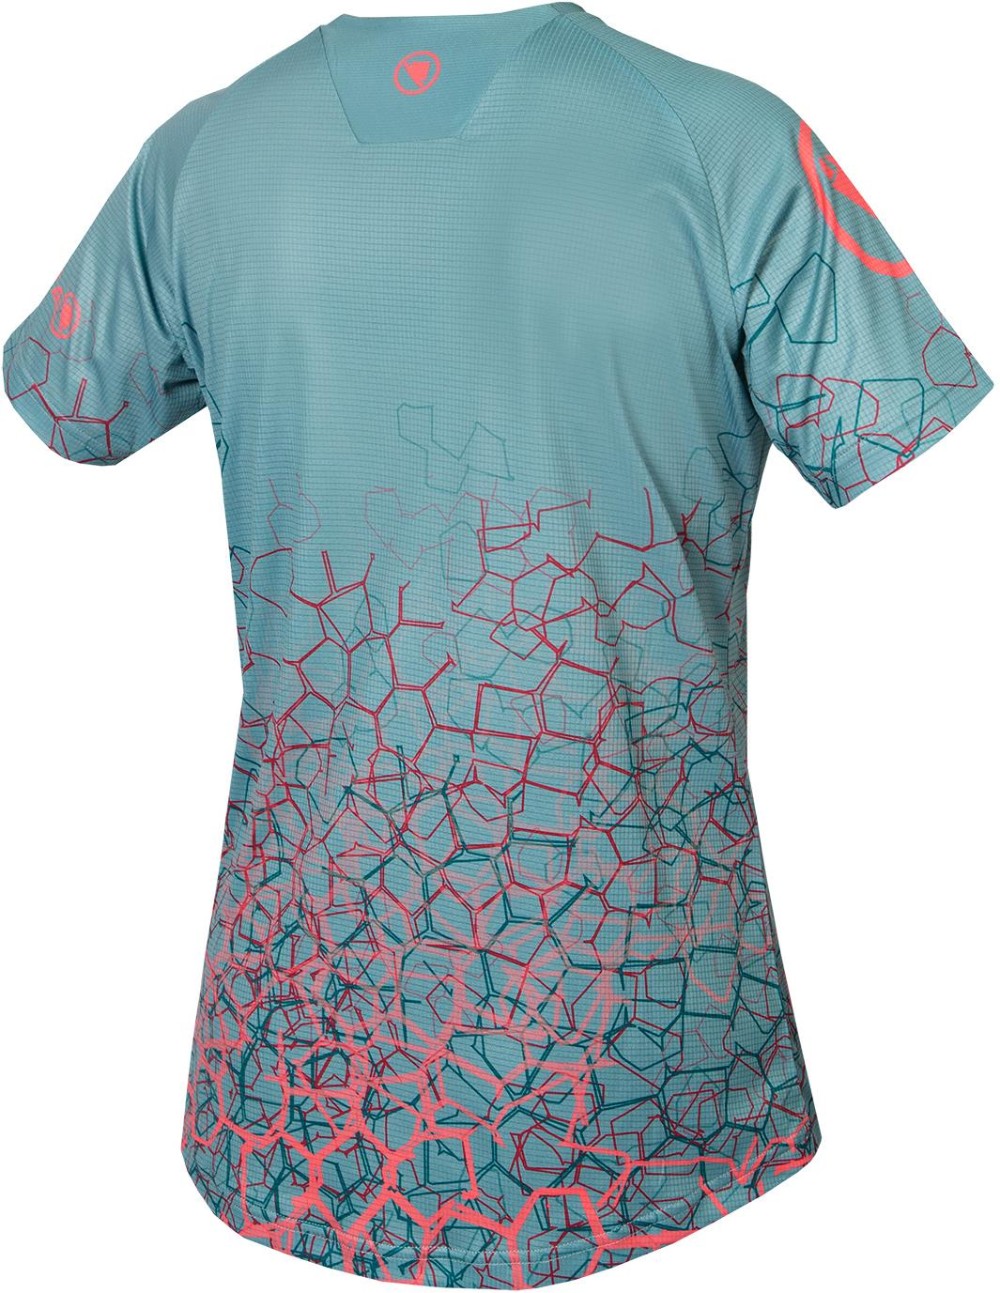 SingleTrack Womens Print Short Sleeve Cycling Tee Jersey Limited Edition image 1